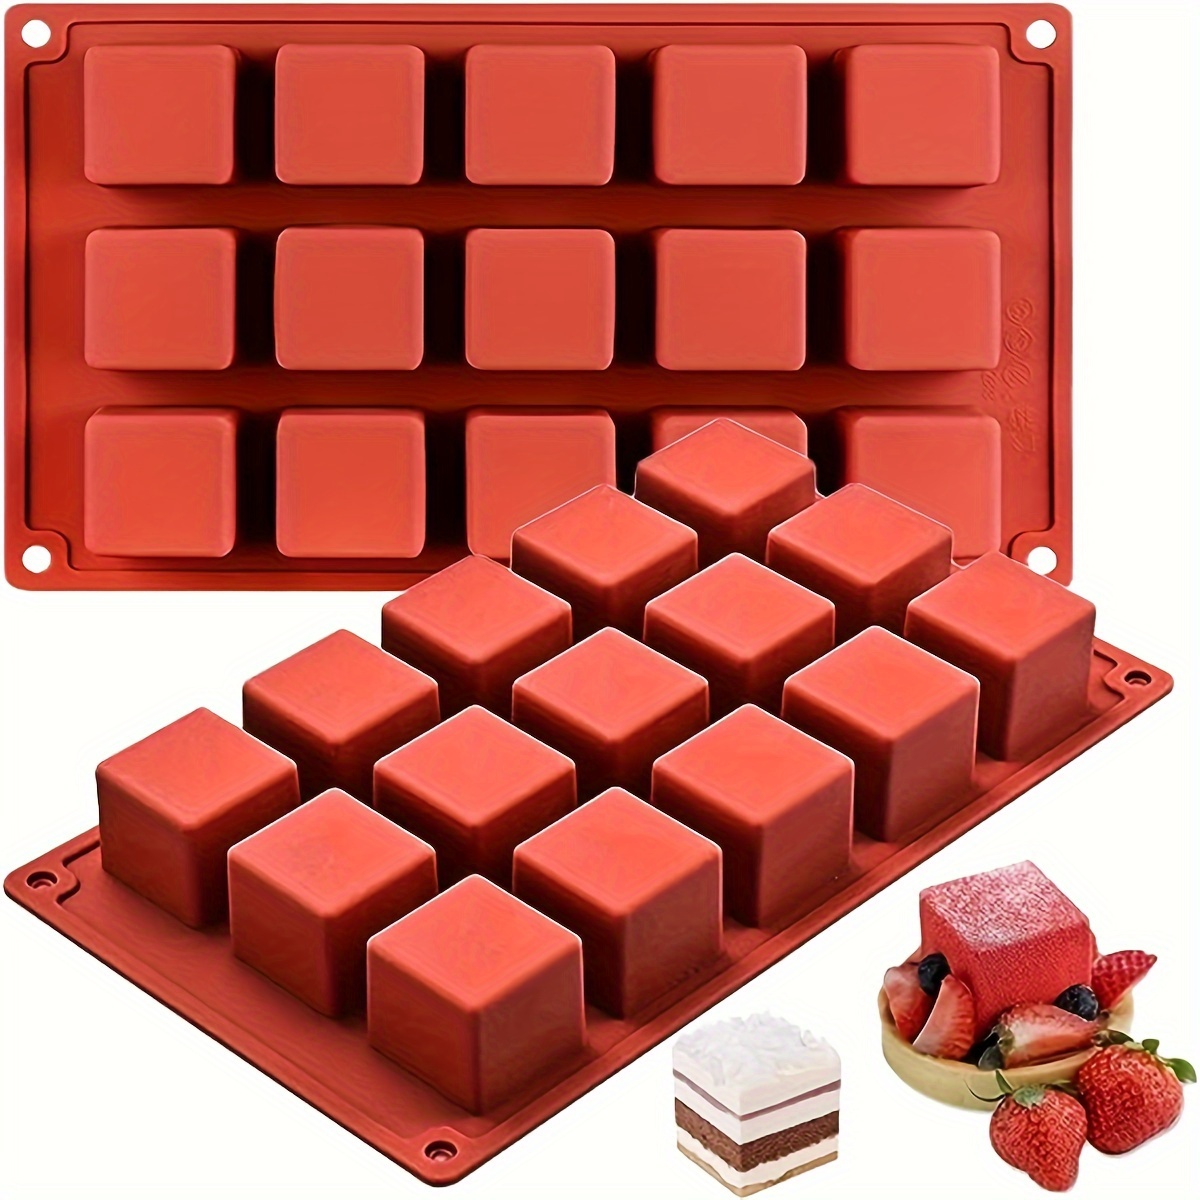 

1pc Square Silicone Mold, Chocolate Mold Mousse Cake Baking Mold For Dessert Cheesecake Truffle Caramel Jelly Brownie Soap (15 Cavities)